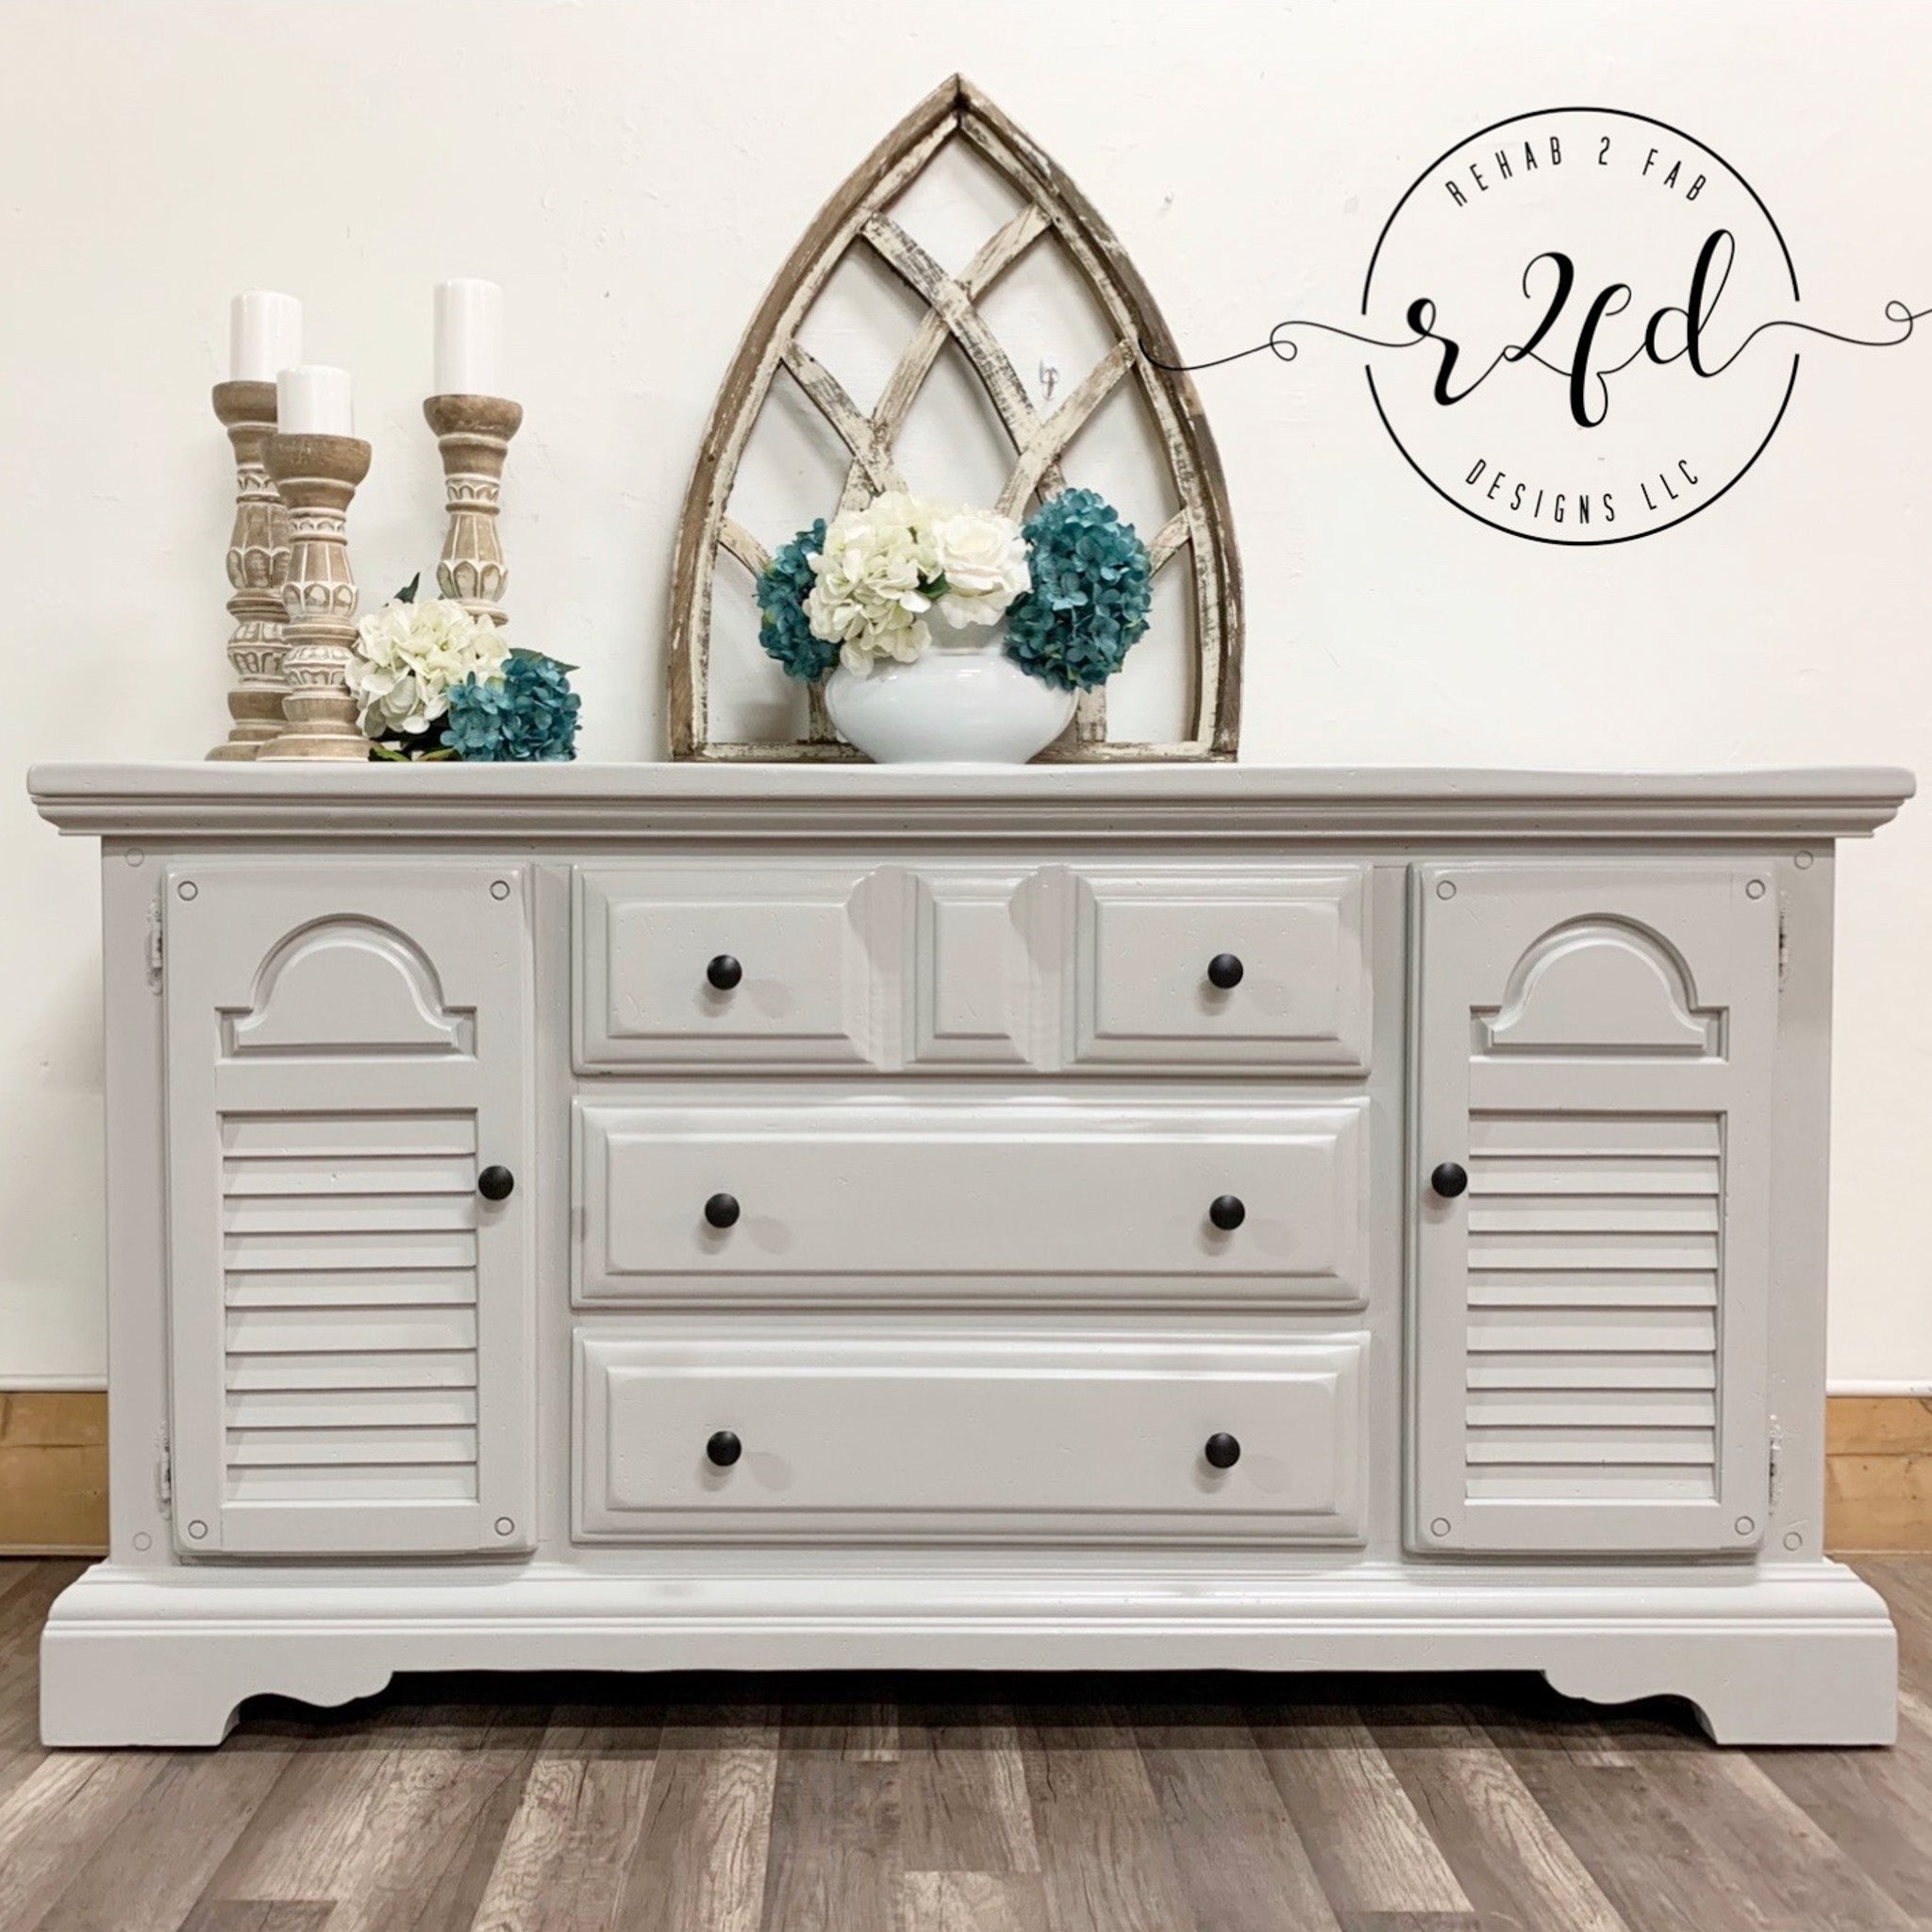 A large vintage dresser refurbished by Rehab 2 Fab Designs LLC is painted in Dixie Belle's Driftwood chalk mineral paint.